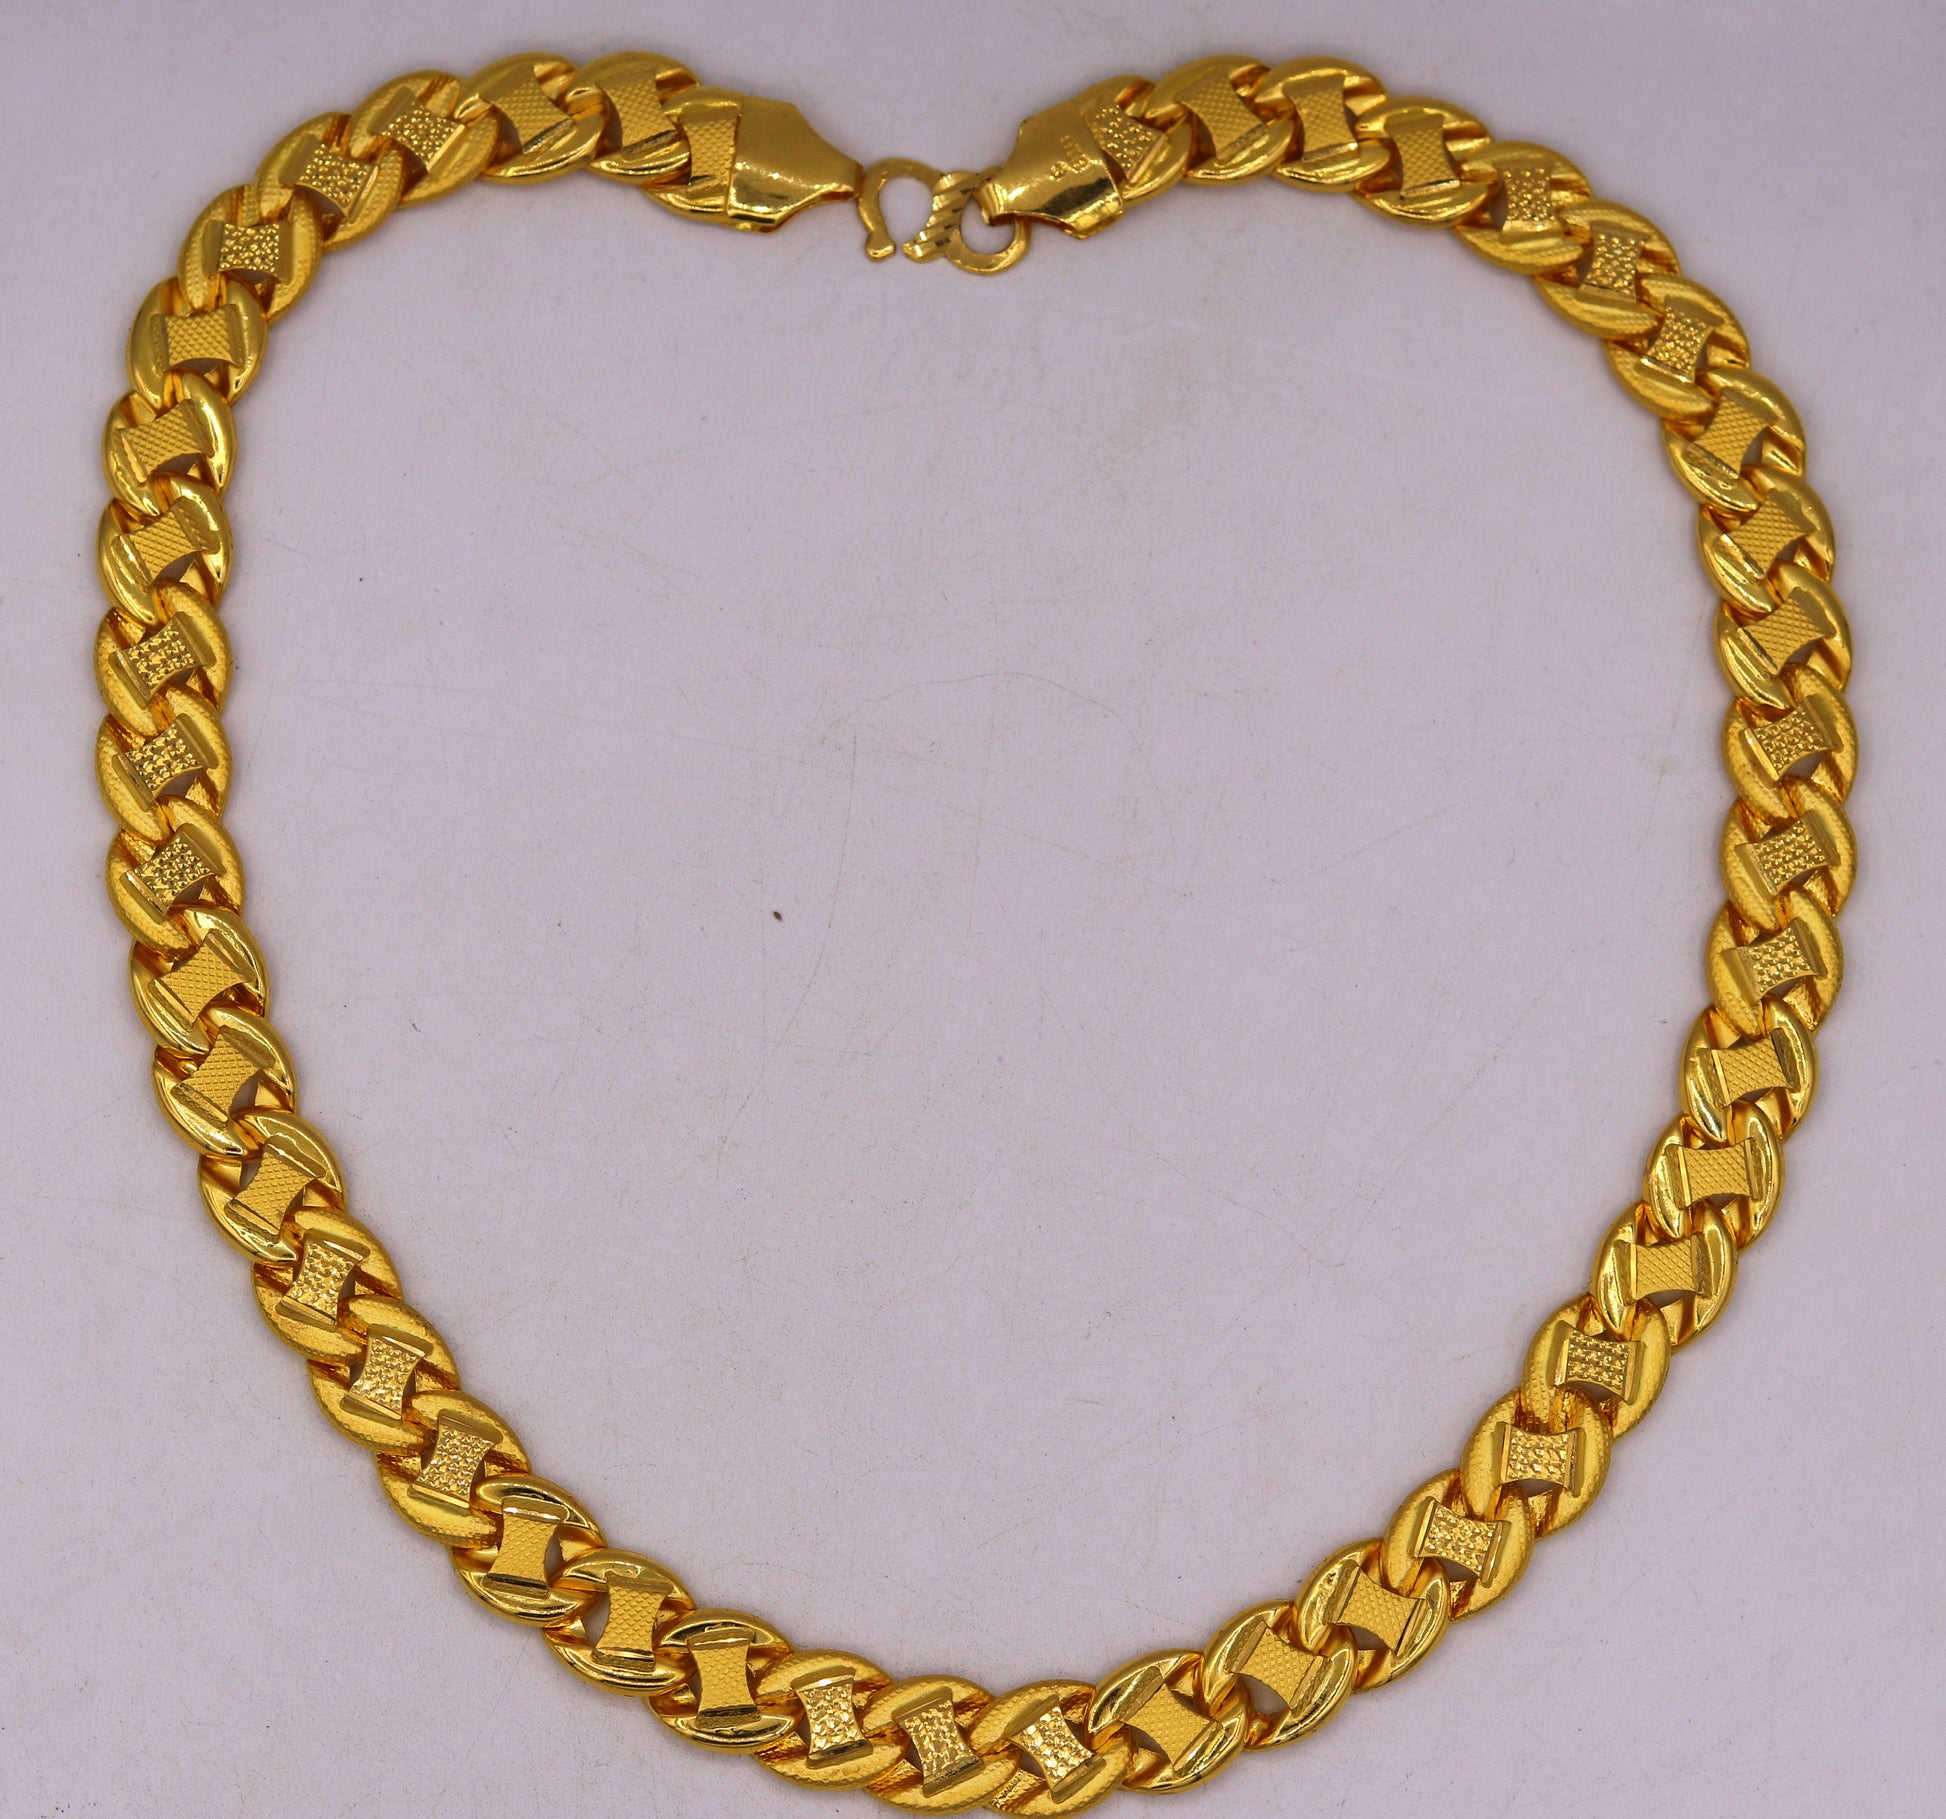 20 inches 22k yellow gold handmade fabulous hollow Link chain necklace excellent gifting jewelry unisex chain ch170 - TRIBAL ORNAMENTS